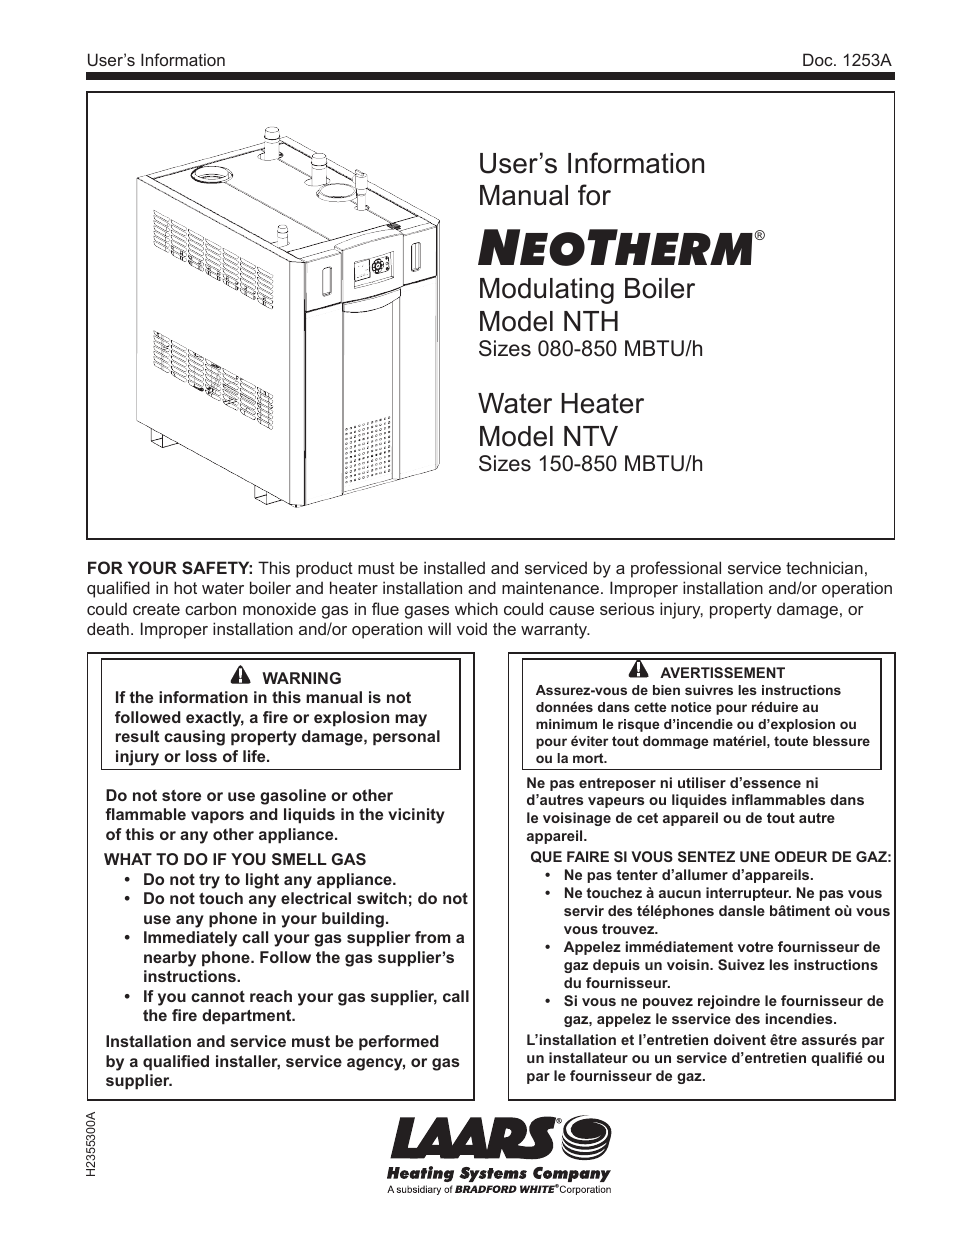 NeoTherm NTV (Sizes 150–850 MBTU/h) - Users Manual